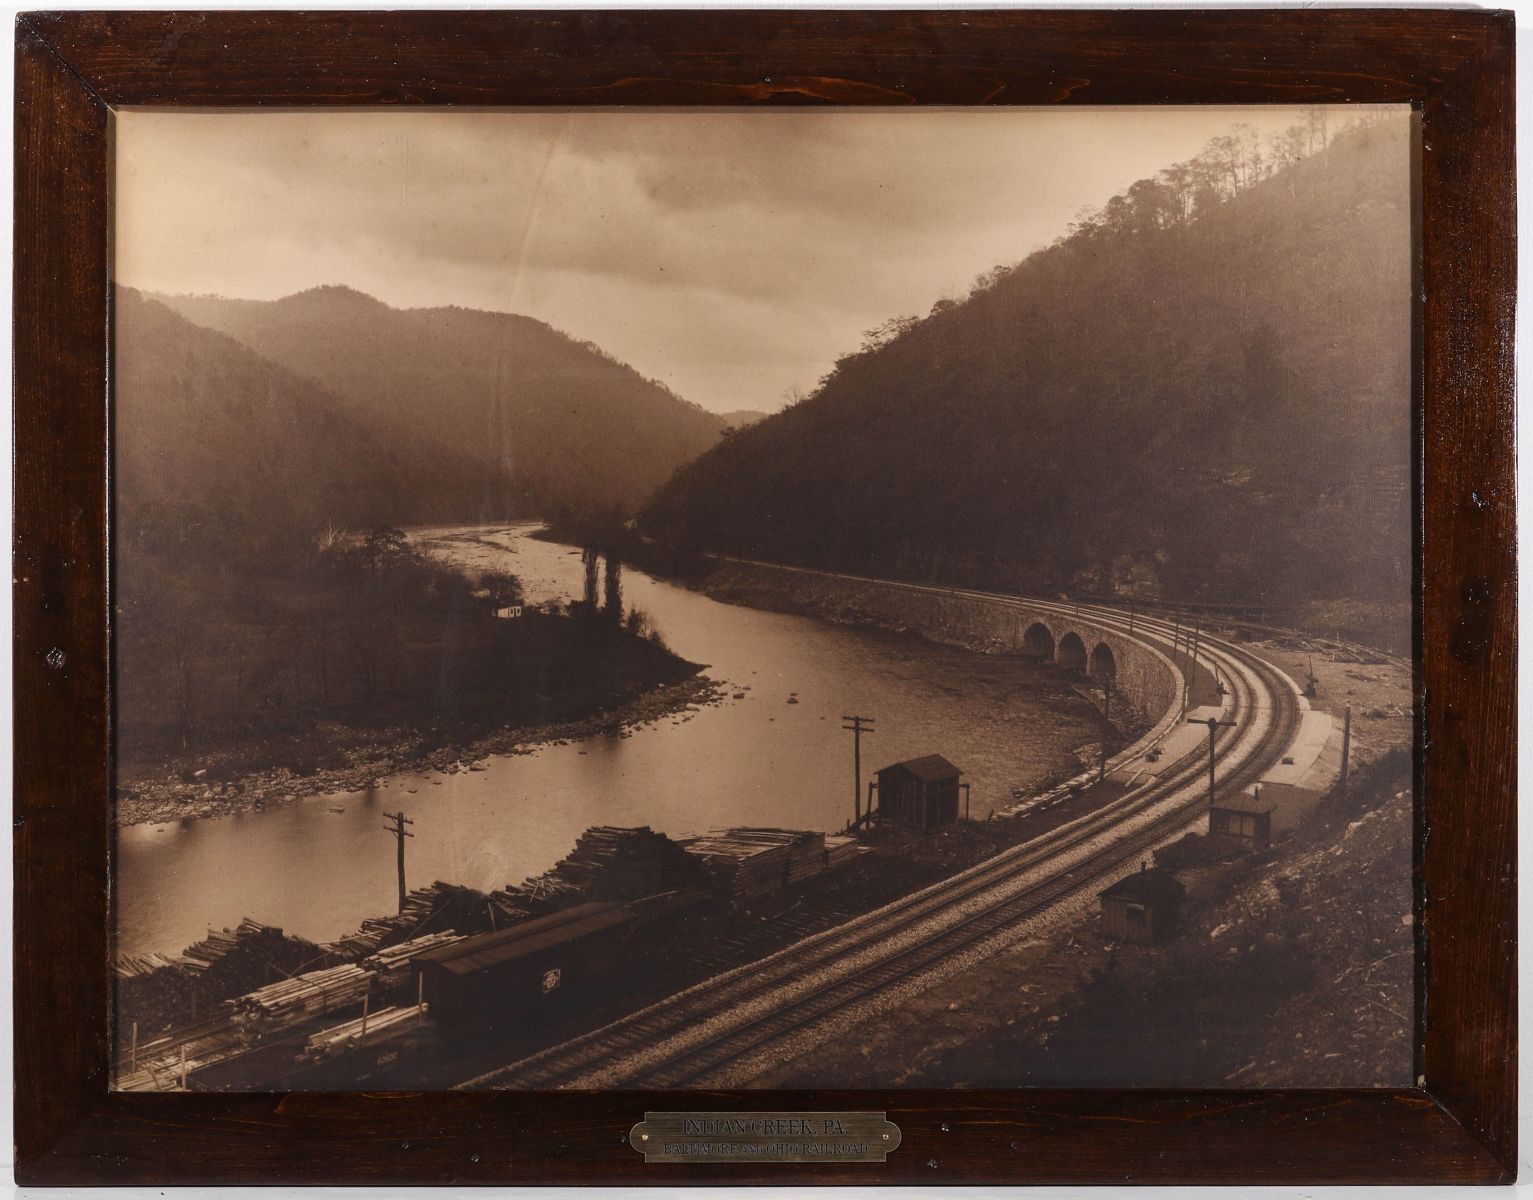 A PHOTOGRAVURE VIEW IN PENNSYLVANIA IMAGE ALONG THE B&O